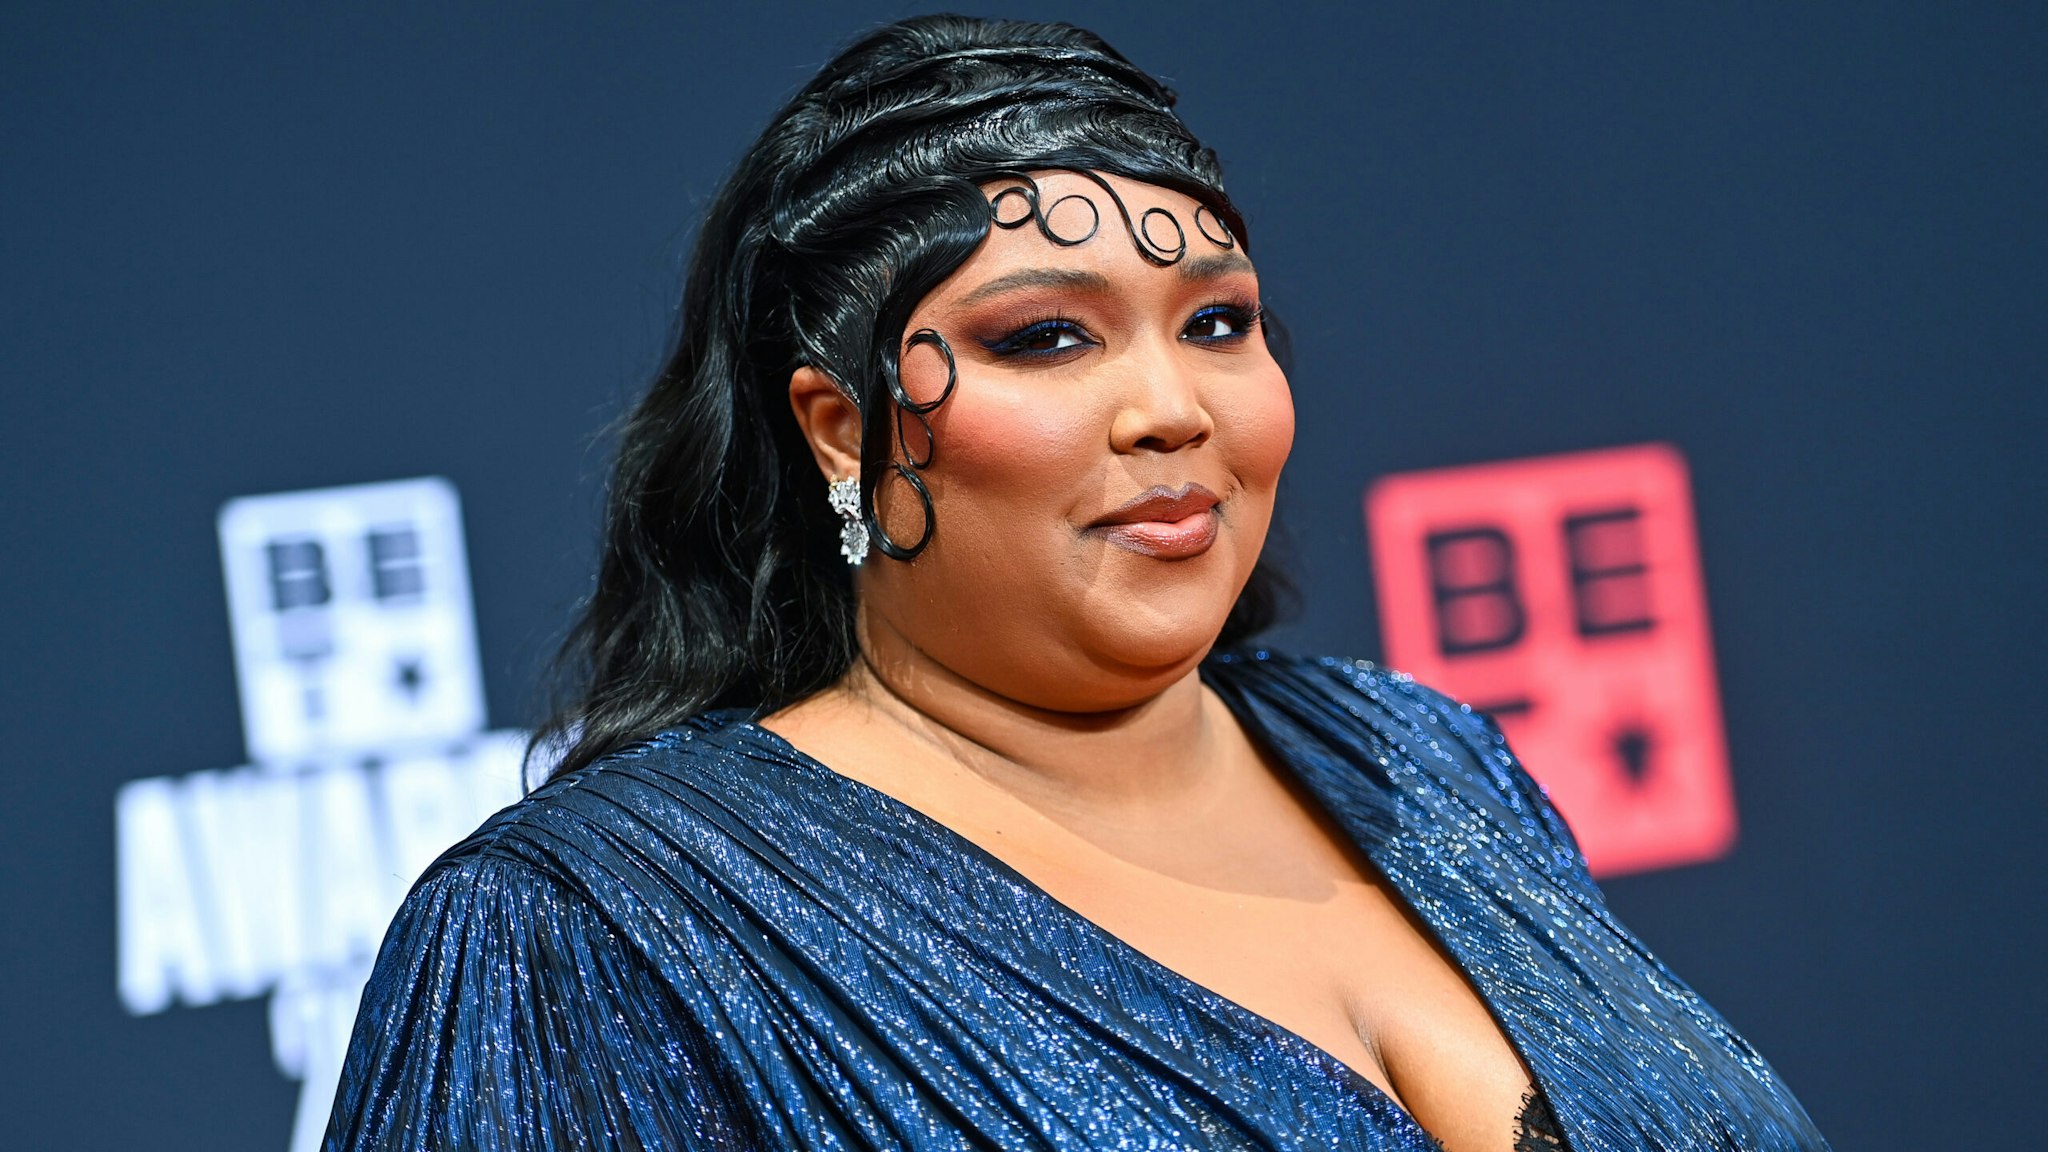 LOS ANGELES, CALIFORNIA - JUNE 26: Lizzo attends the 2022 BET Awards at Microsoft Theater on June 26, 2022 in Los Angeles, California.